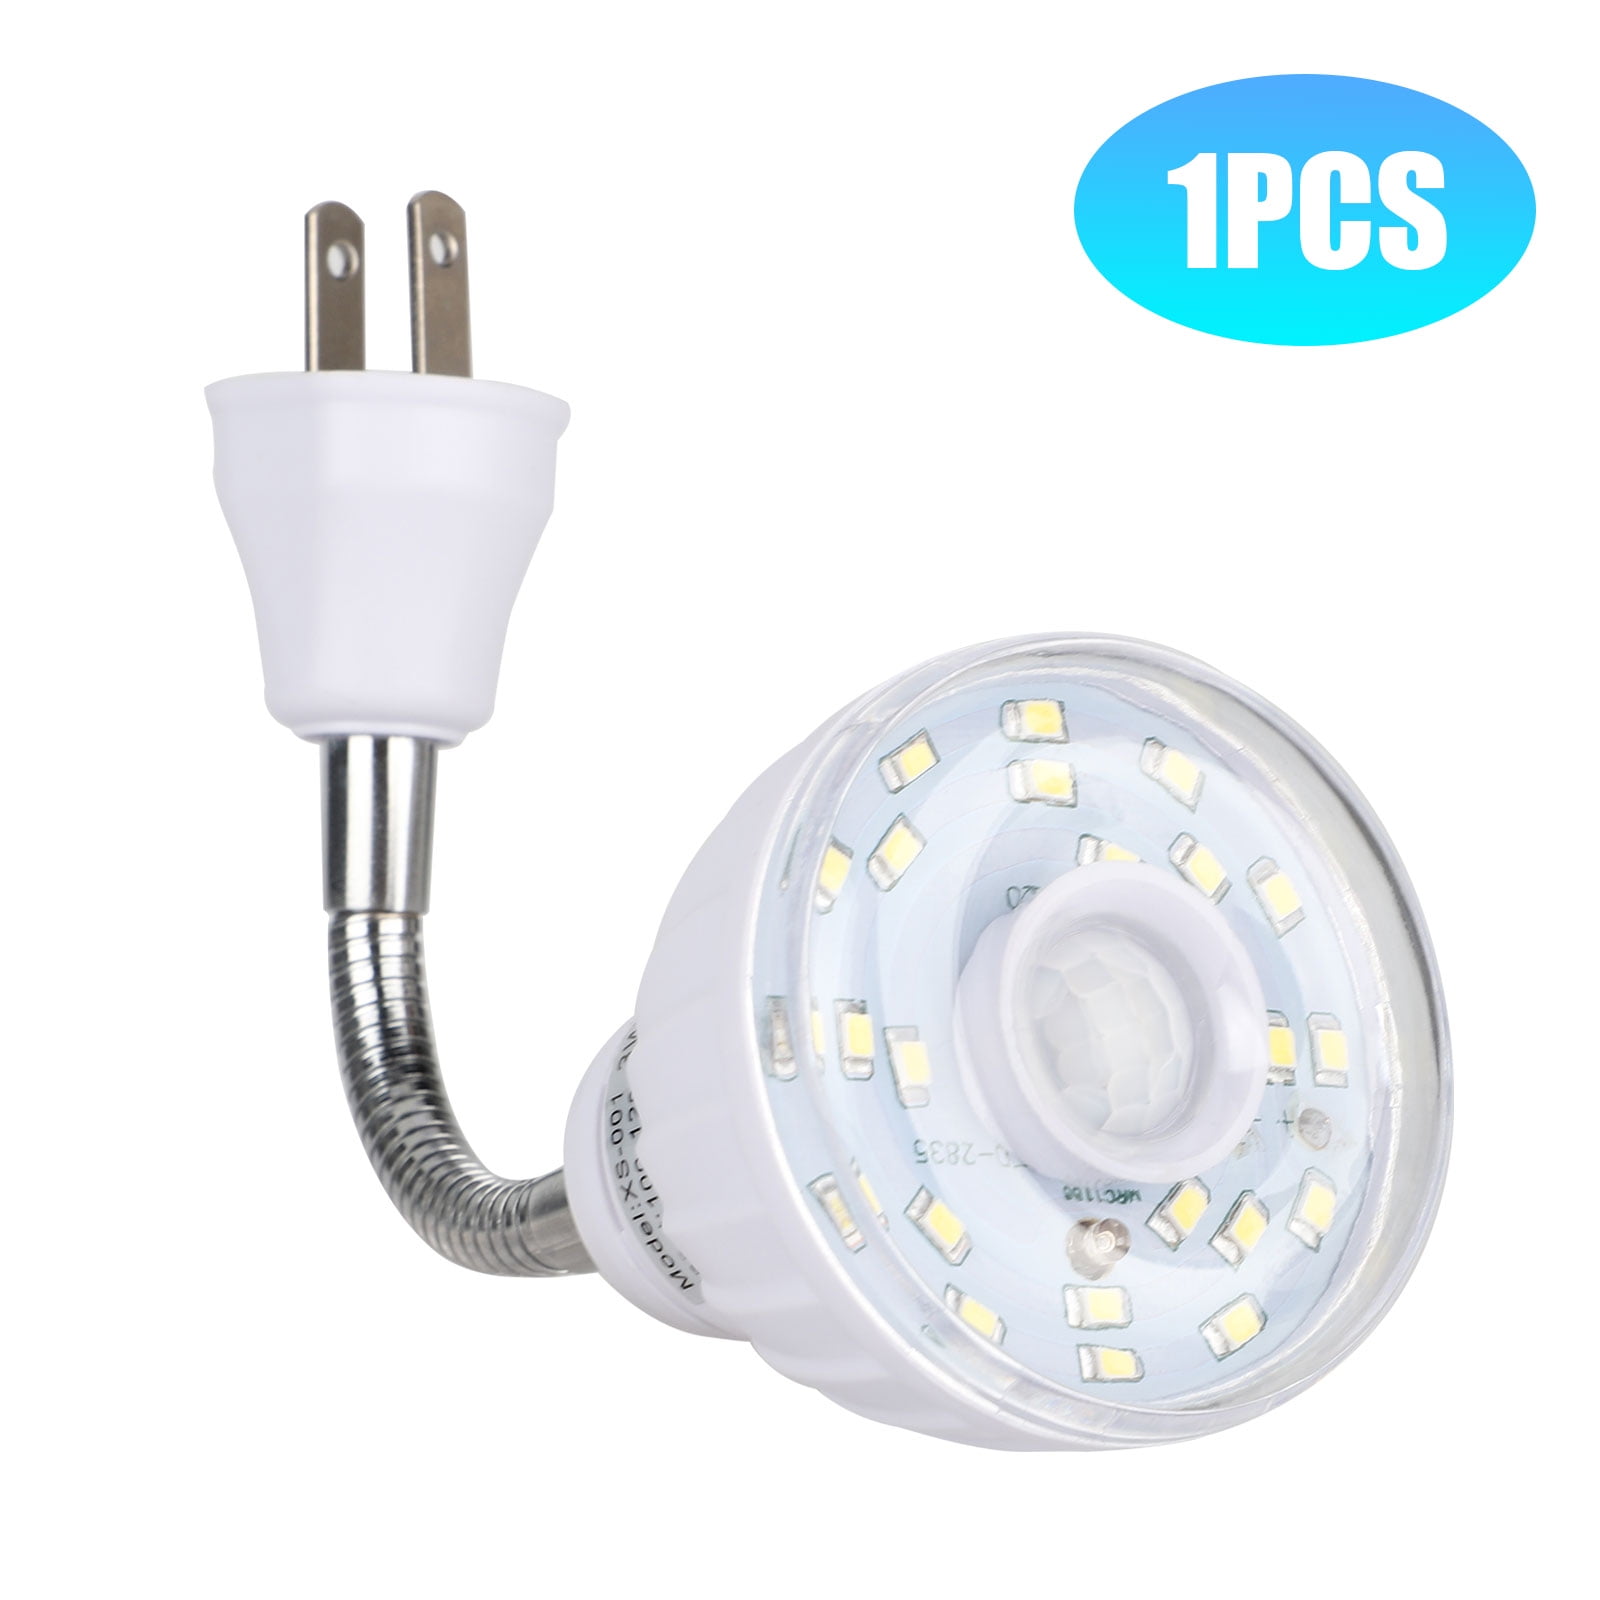 with bulb included NEW 4 Plug in Night Light with Auto Dusk to Dawn Sensor 